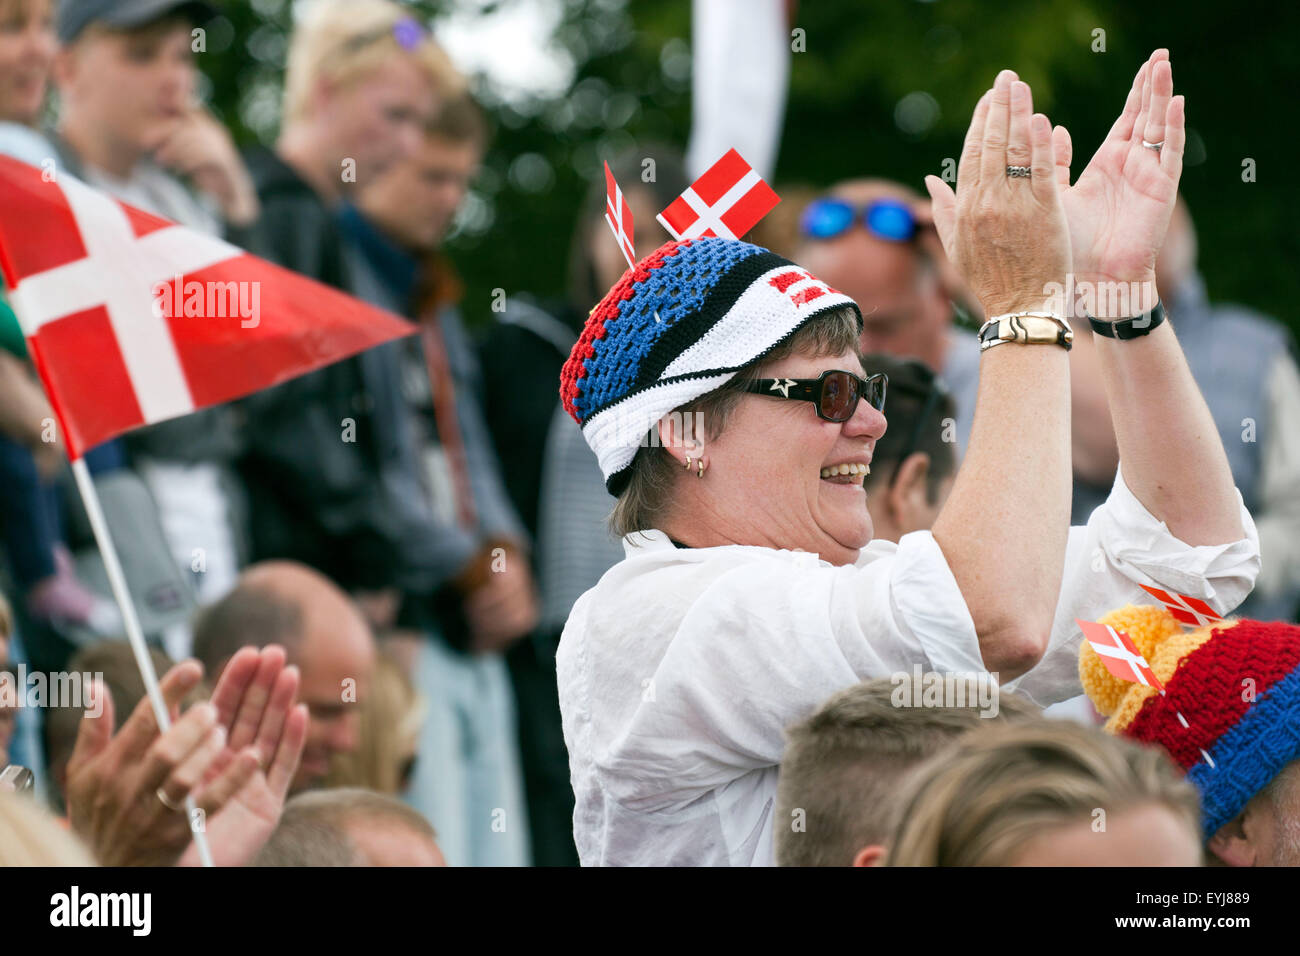 Copenhagen, Denmark, July 30th, 2015: Danish spectators applaus good results by archer Stephan Hansen who shot himself into the final in compound bow in a tight match. Credit:  OJPHOTOS/Alamy Live News Stock Photo